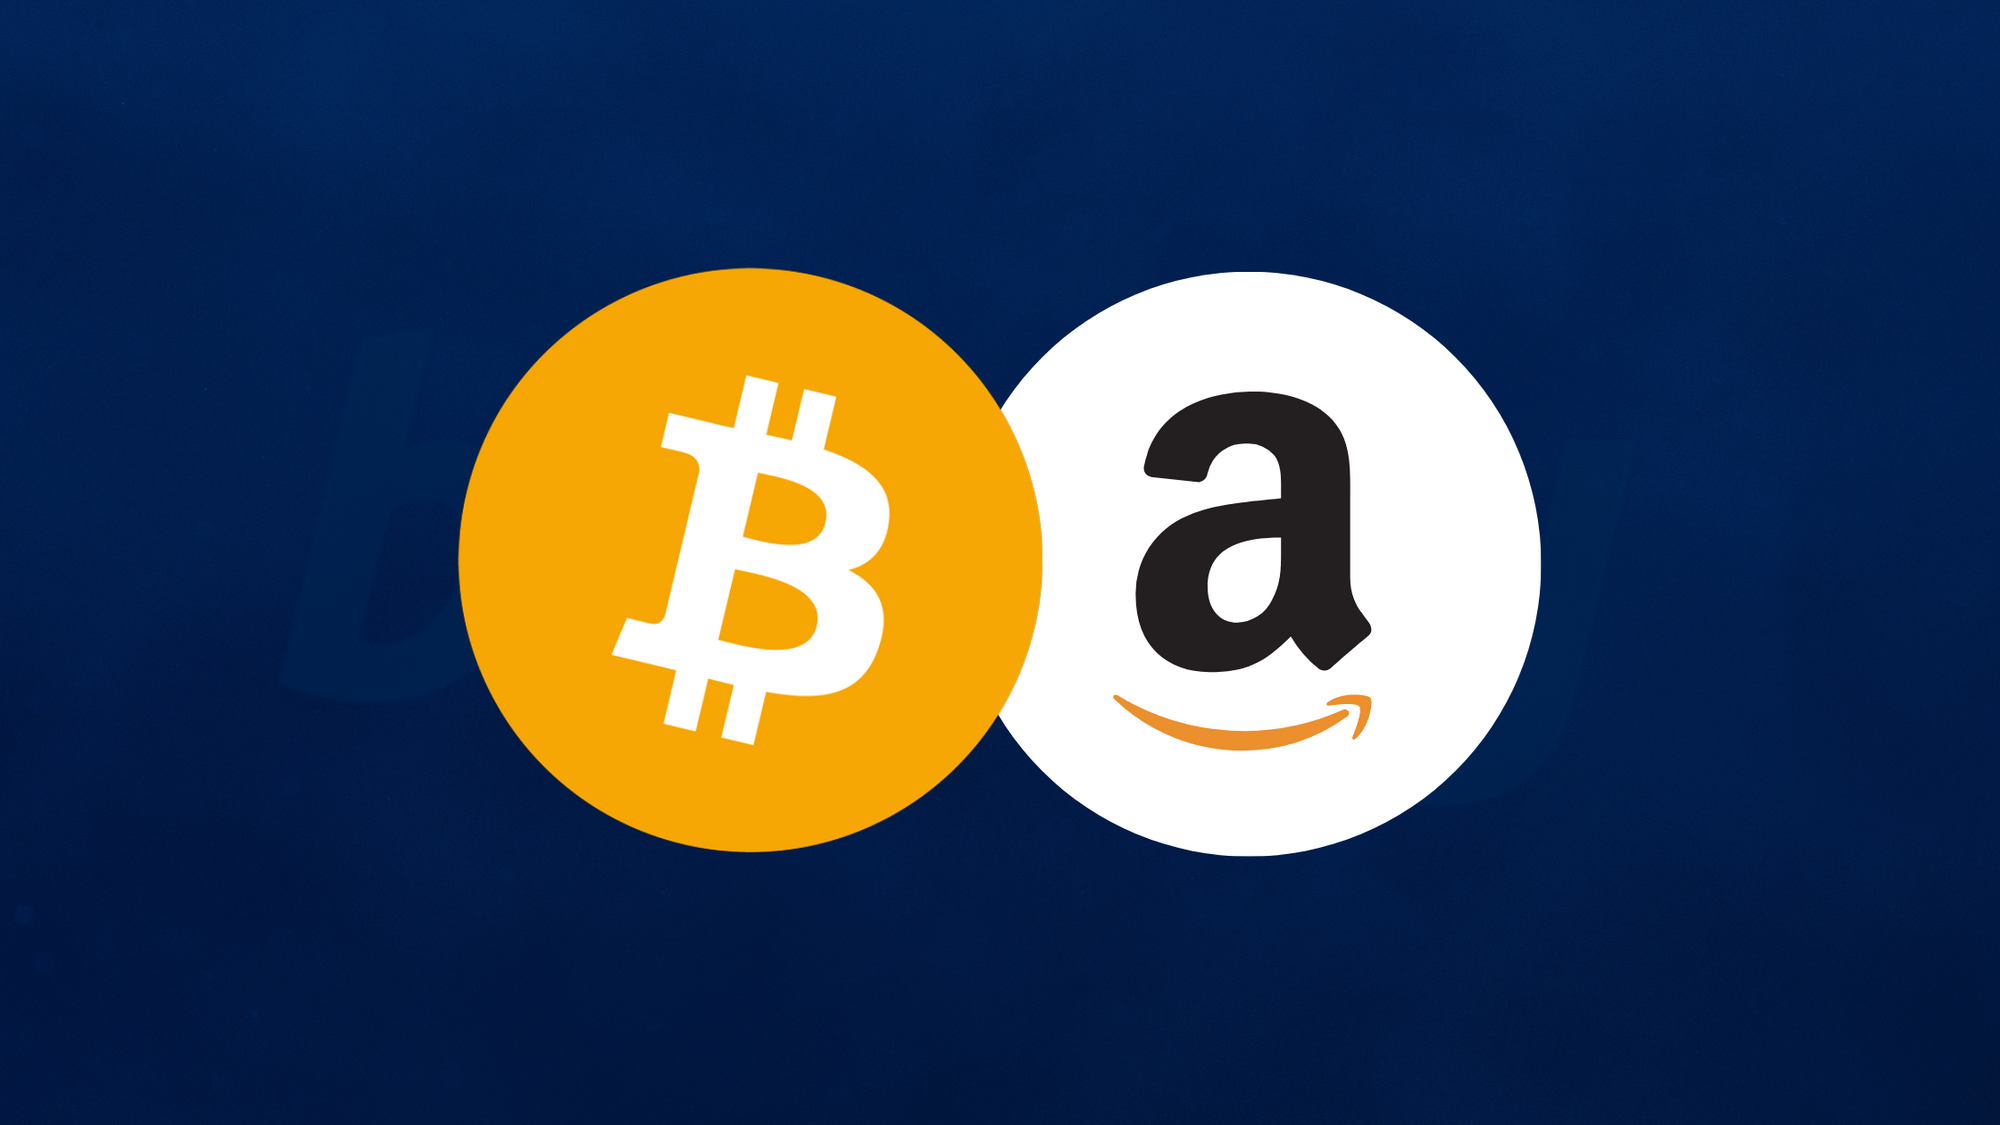 How to Buy Amazon Gift Cards with Bitcoin, DOGE, Litecoin & other Cryptocurrencies